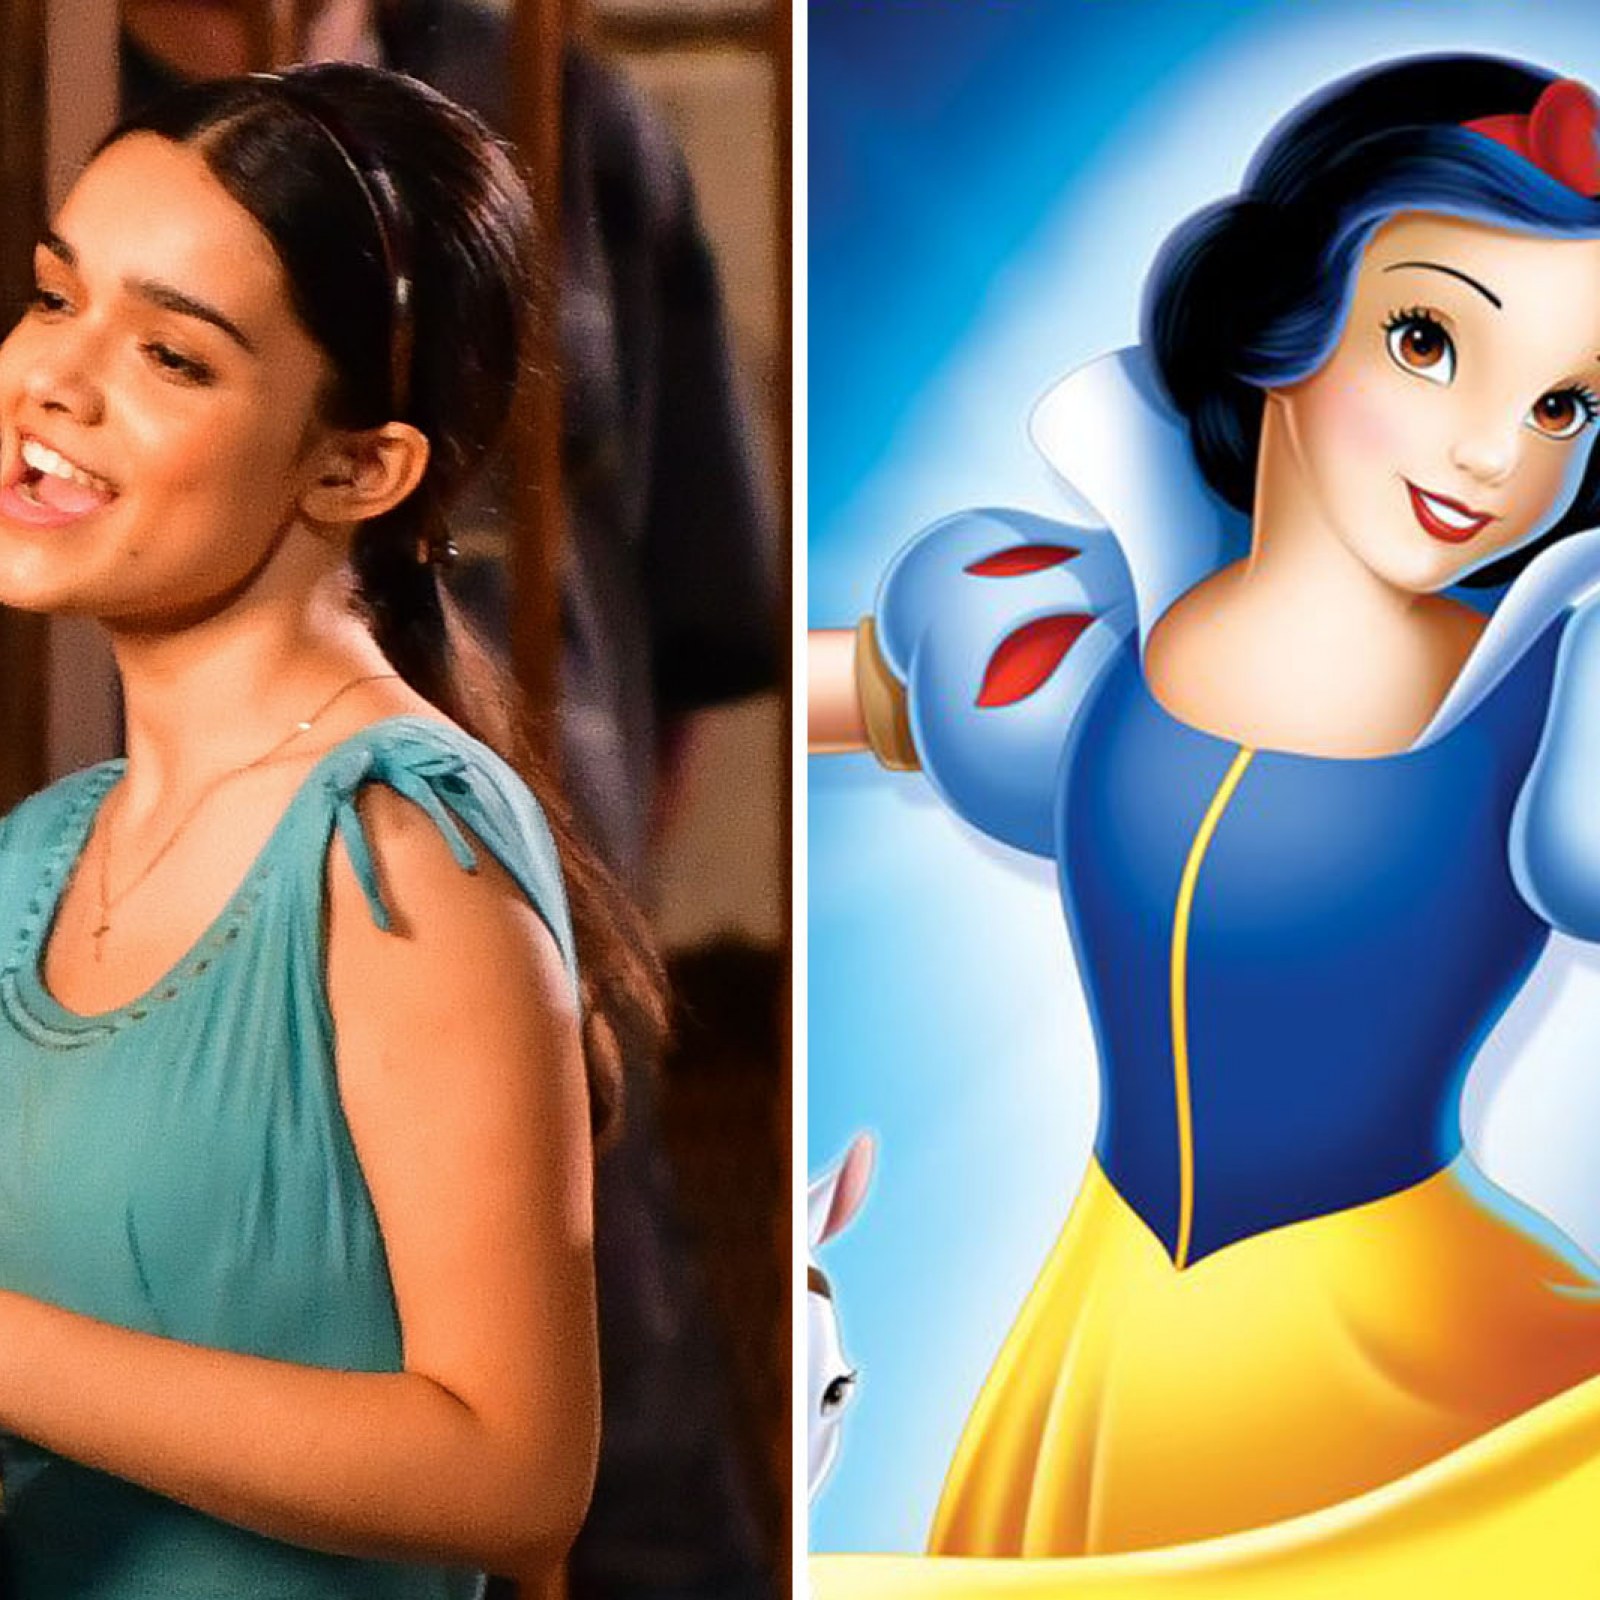 Rachel Zegler as Snow White Leaves Gab Users Outraged at 'Black' Actress in  Role